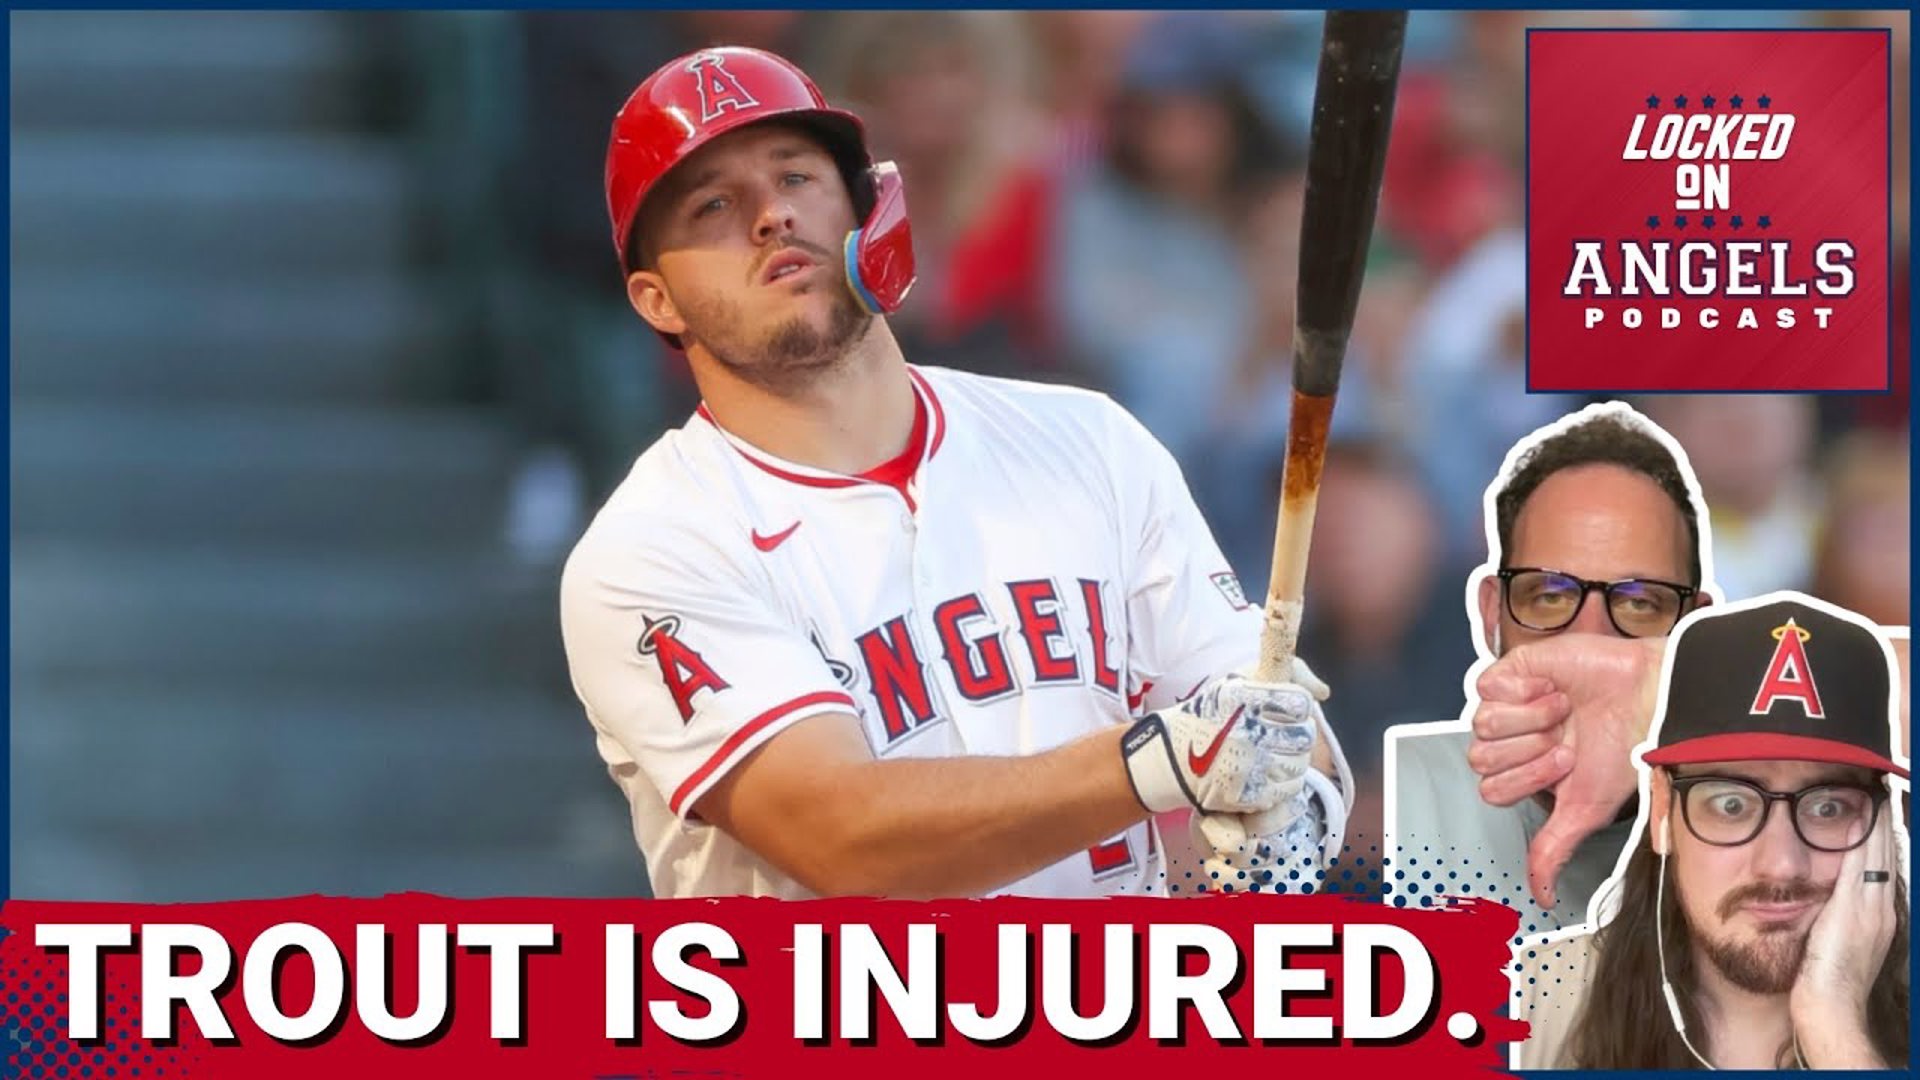 The Los Angeles Angels got some bad news about Mike Trout yesterday, as he was diagnosed with a torn left meniscus that will cause him to miss some time this season.